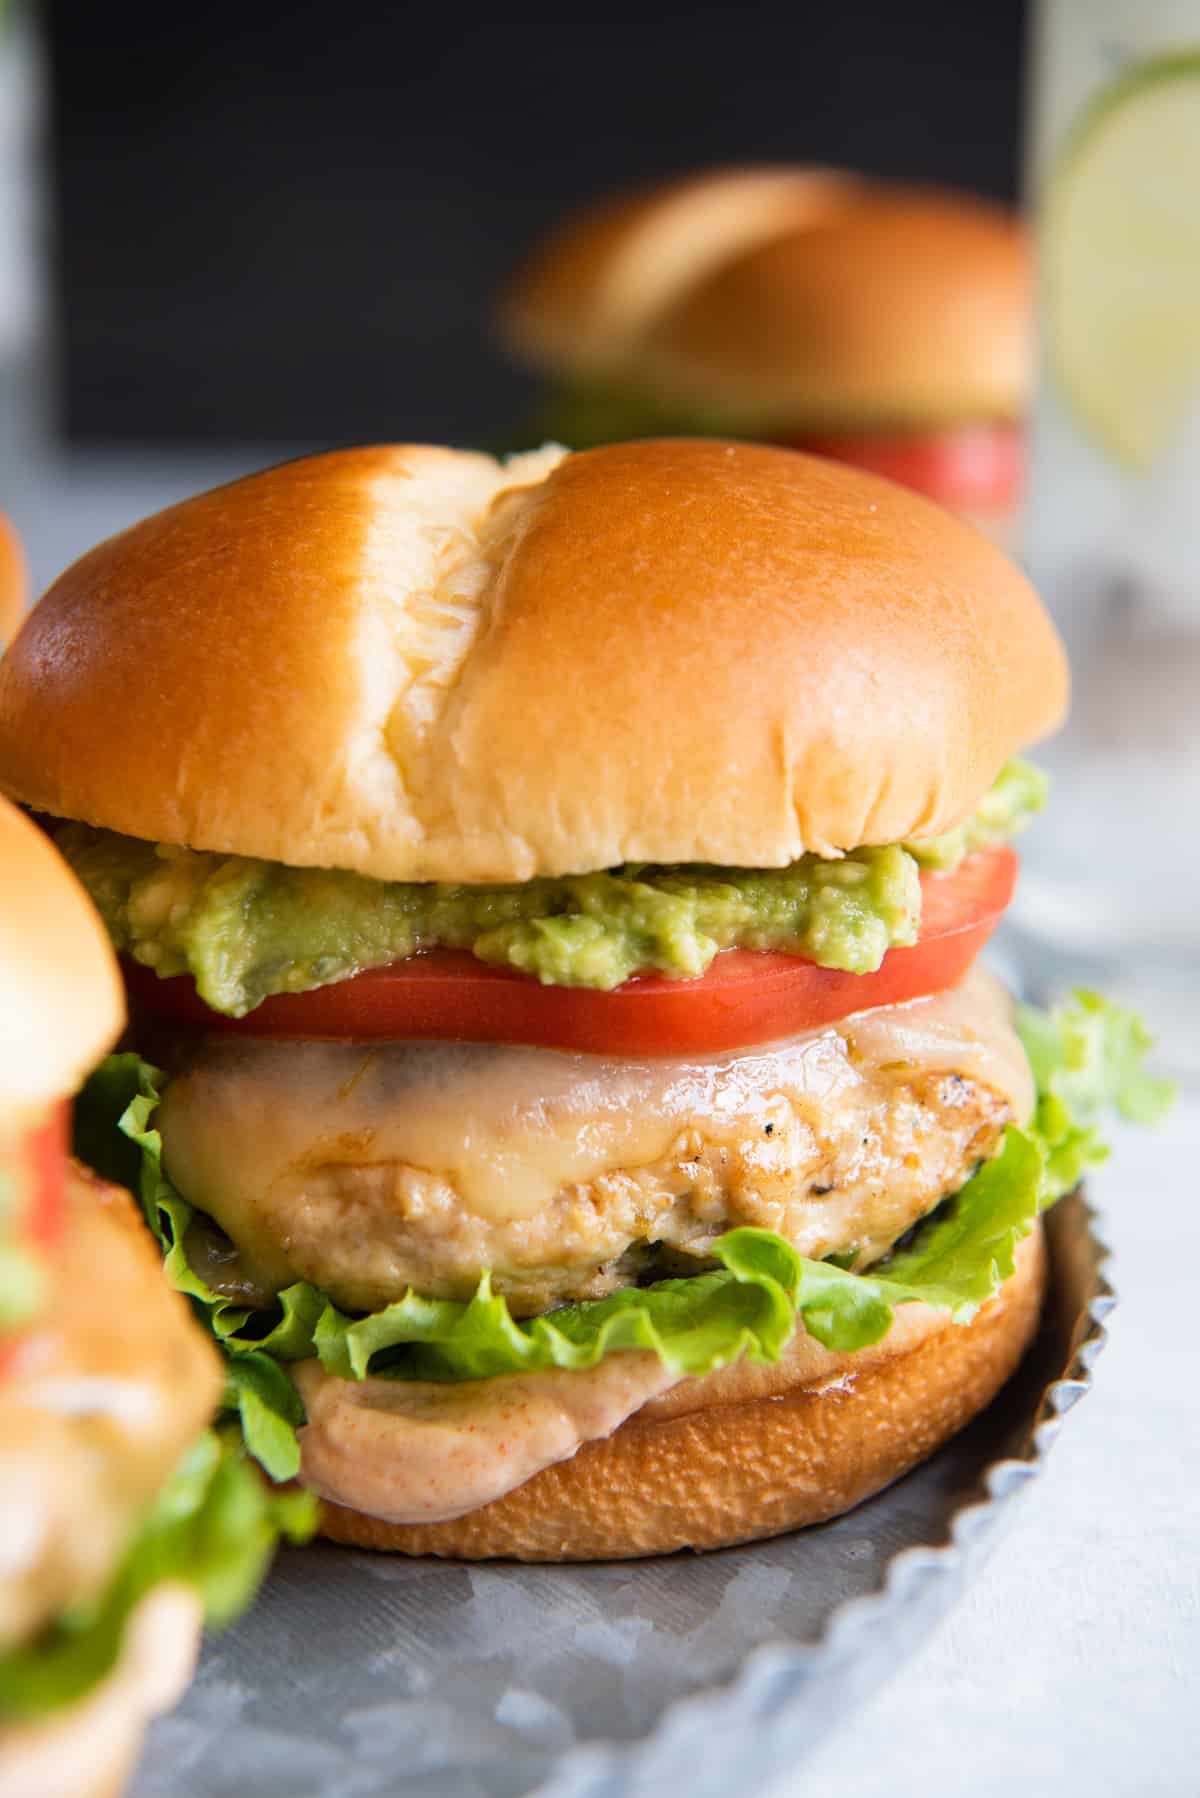 A side view of a chicken burger with sauce, lettuce, tomato, and avocado on a metal tray.